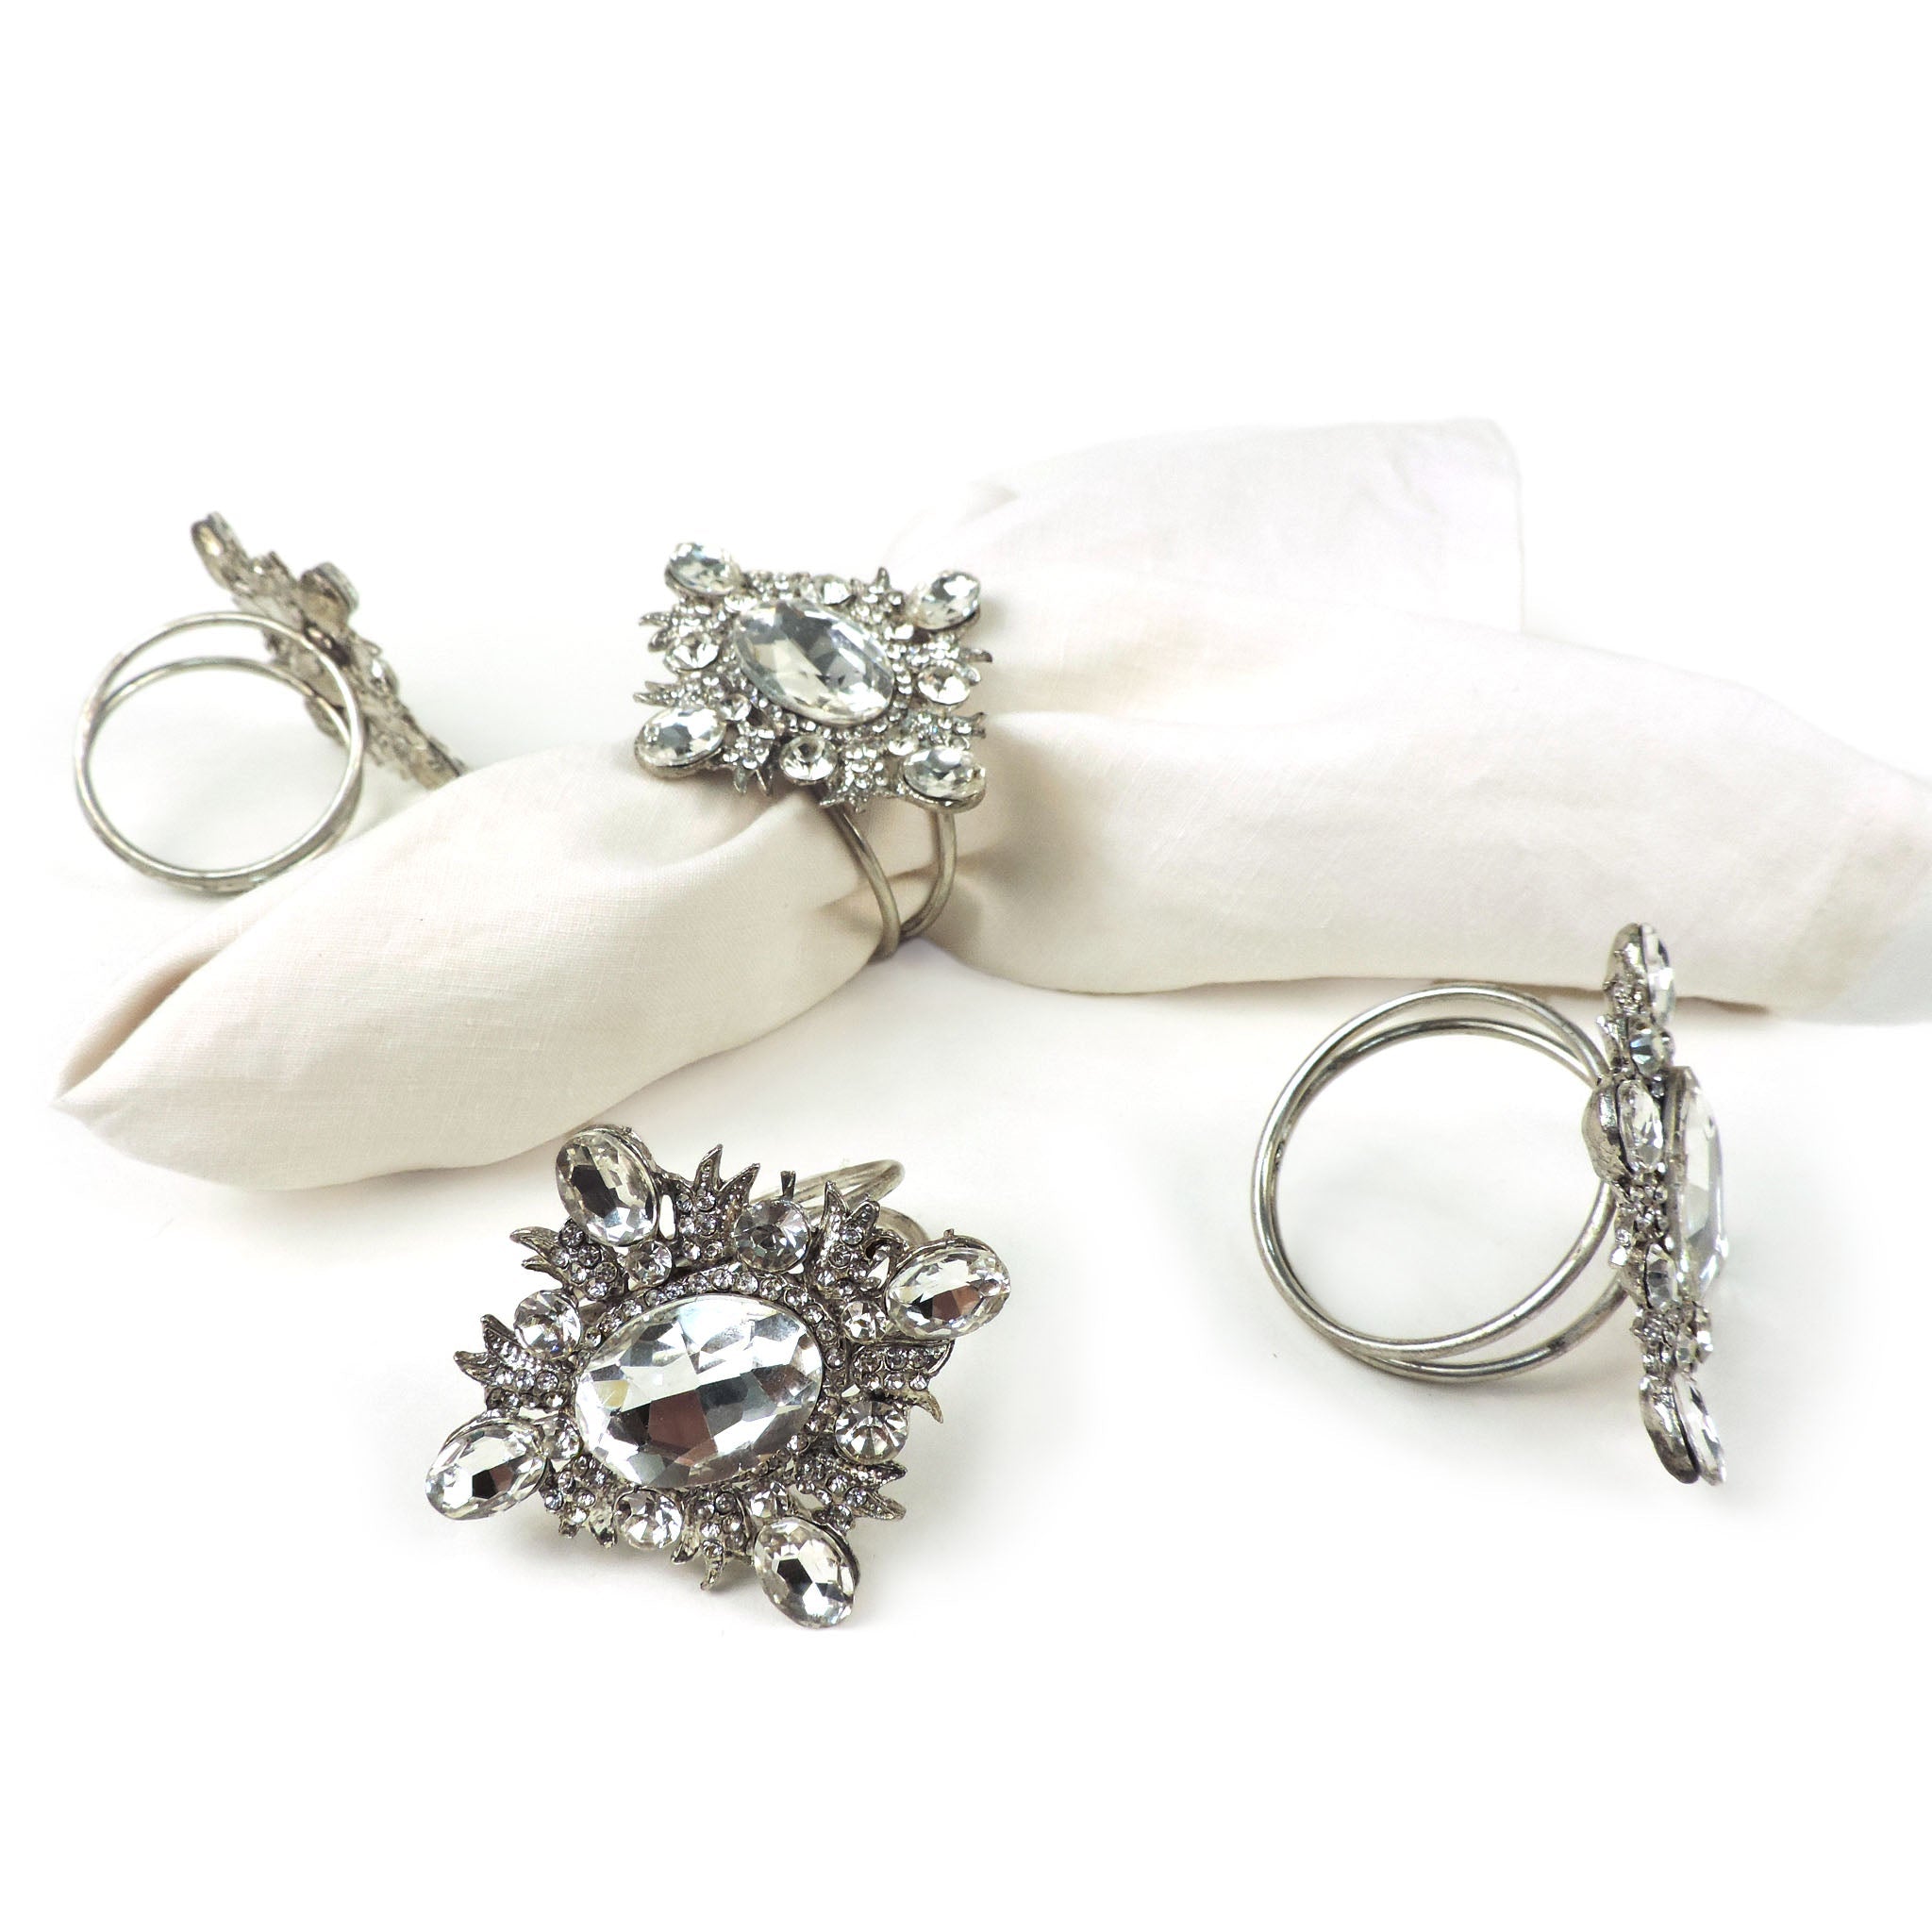 Royal Heirloom Napkin Ring in Silver, Set of 4